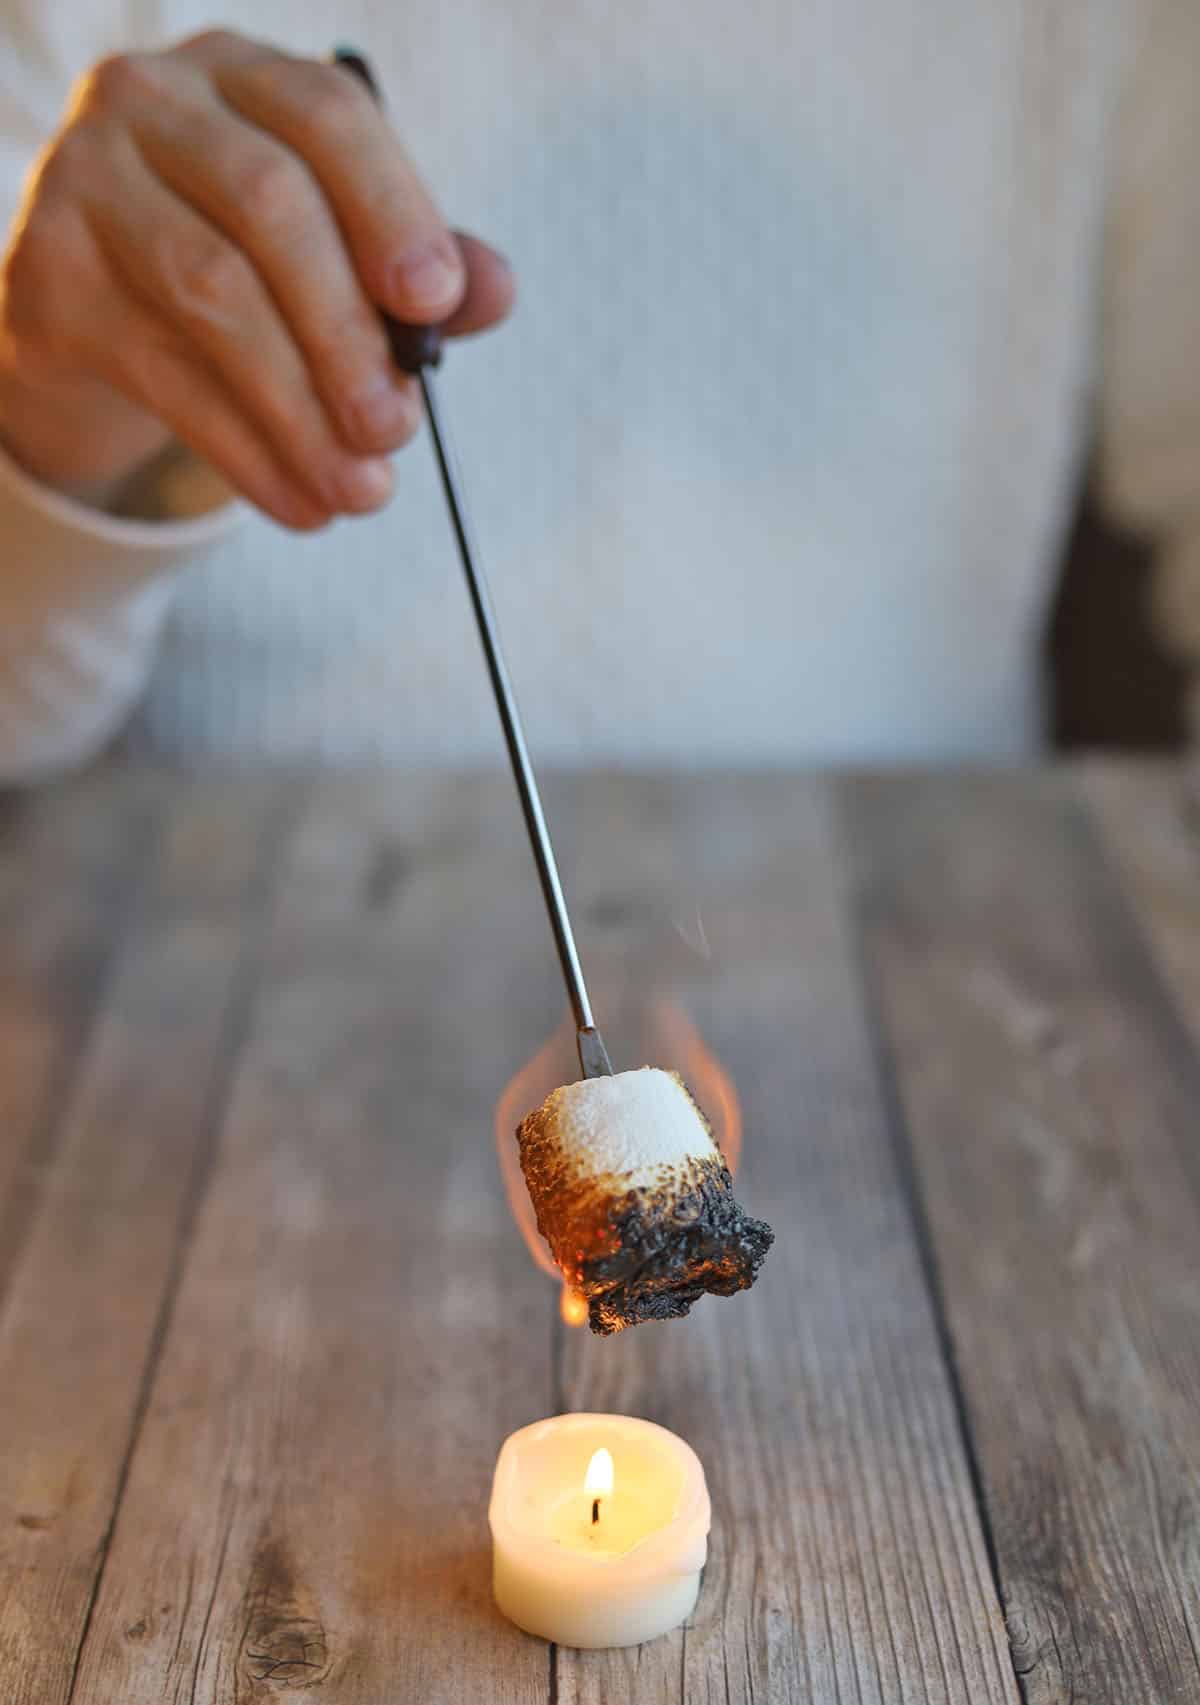 Marshmallow being roasted over candle.